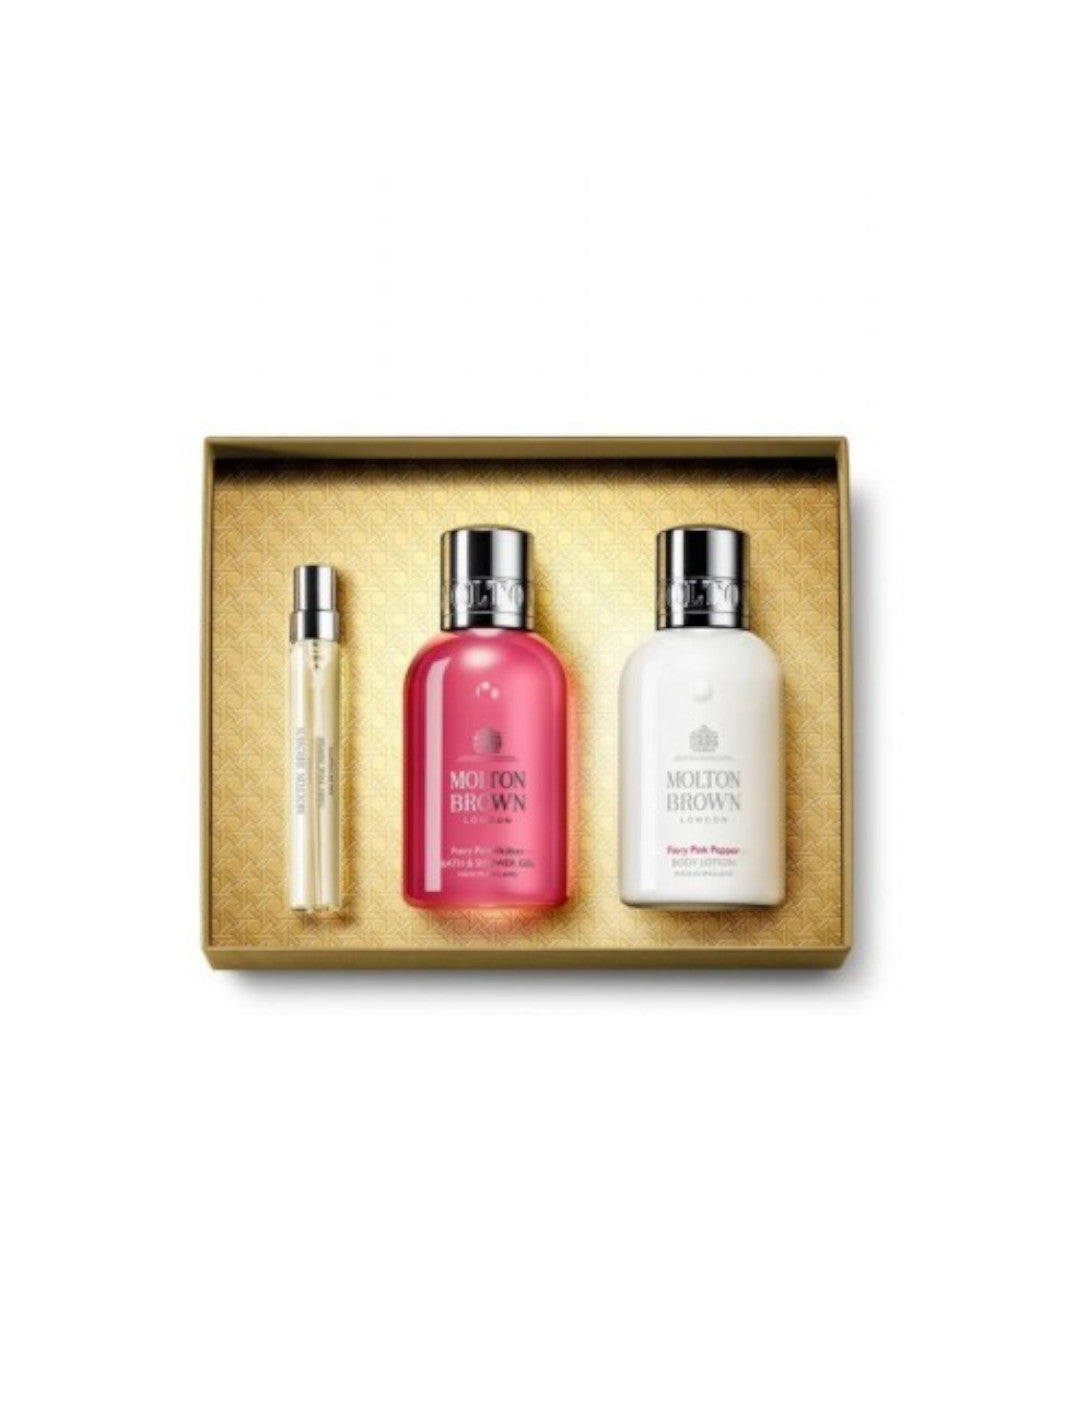 fiery pink pepper fragrance gift sets